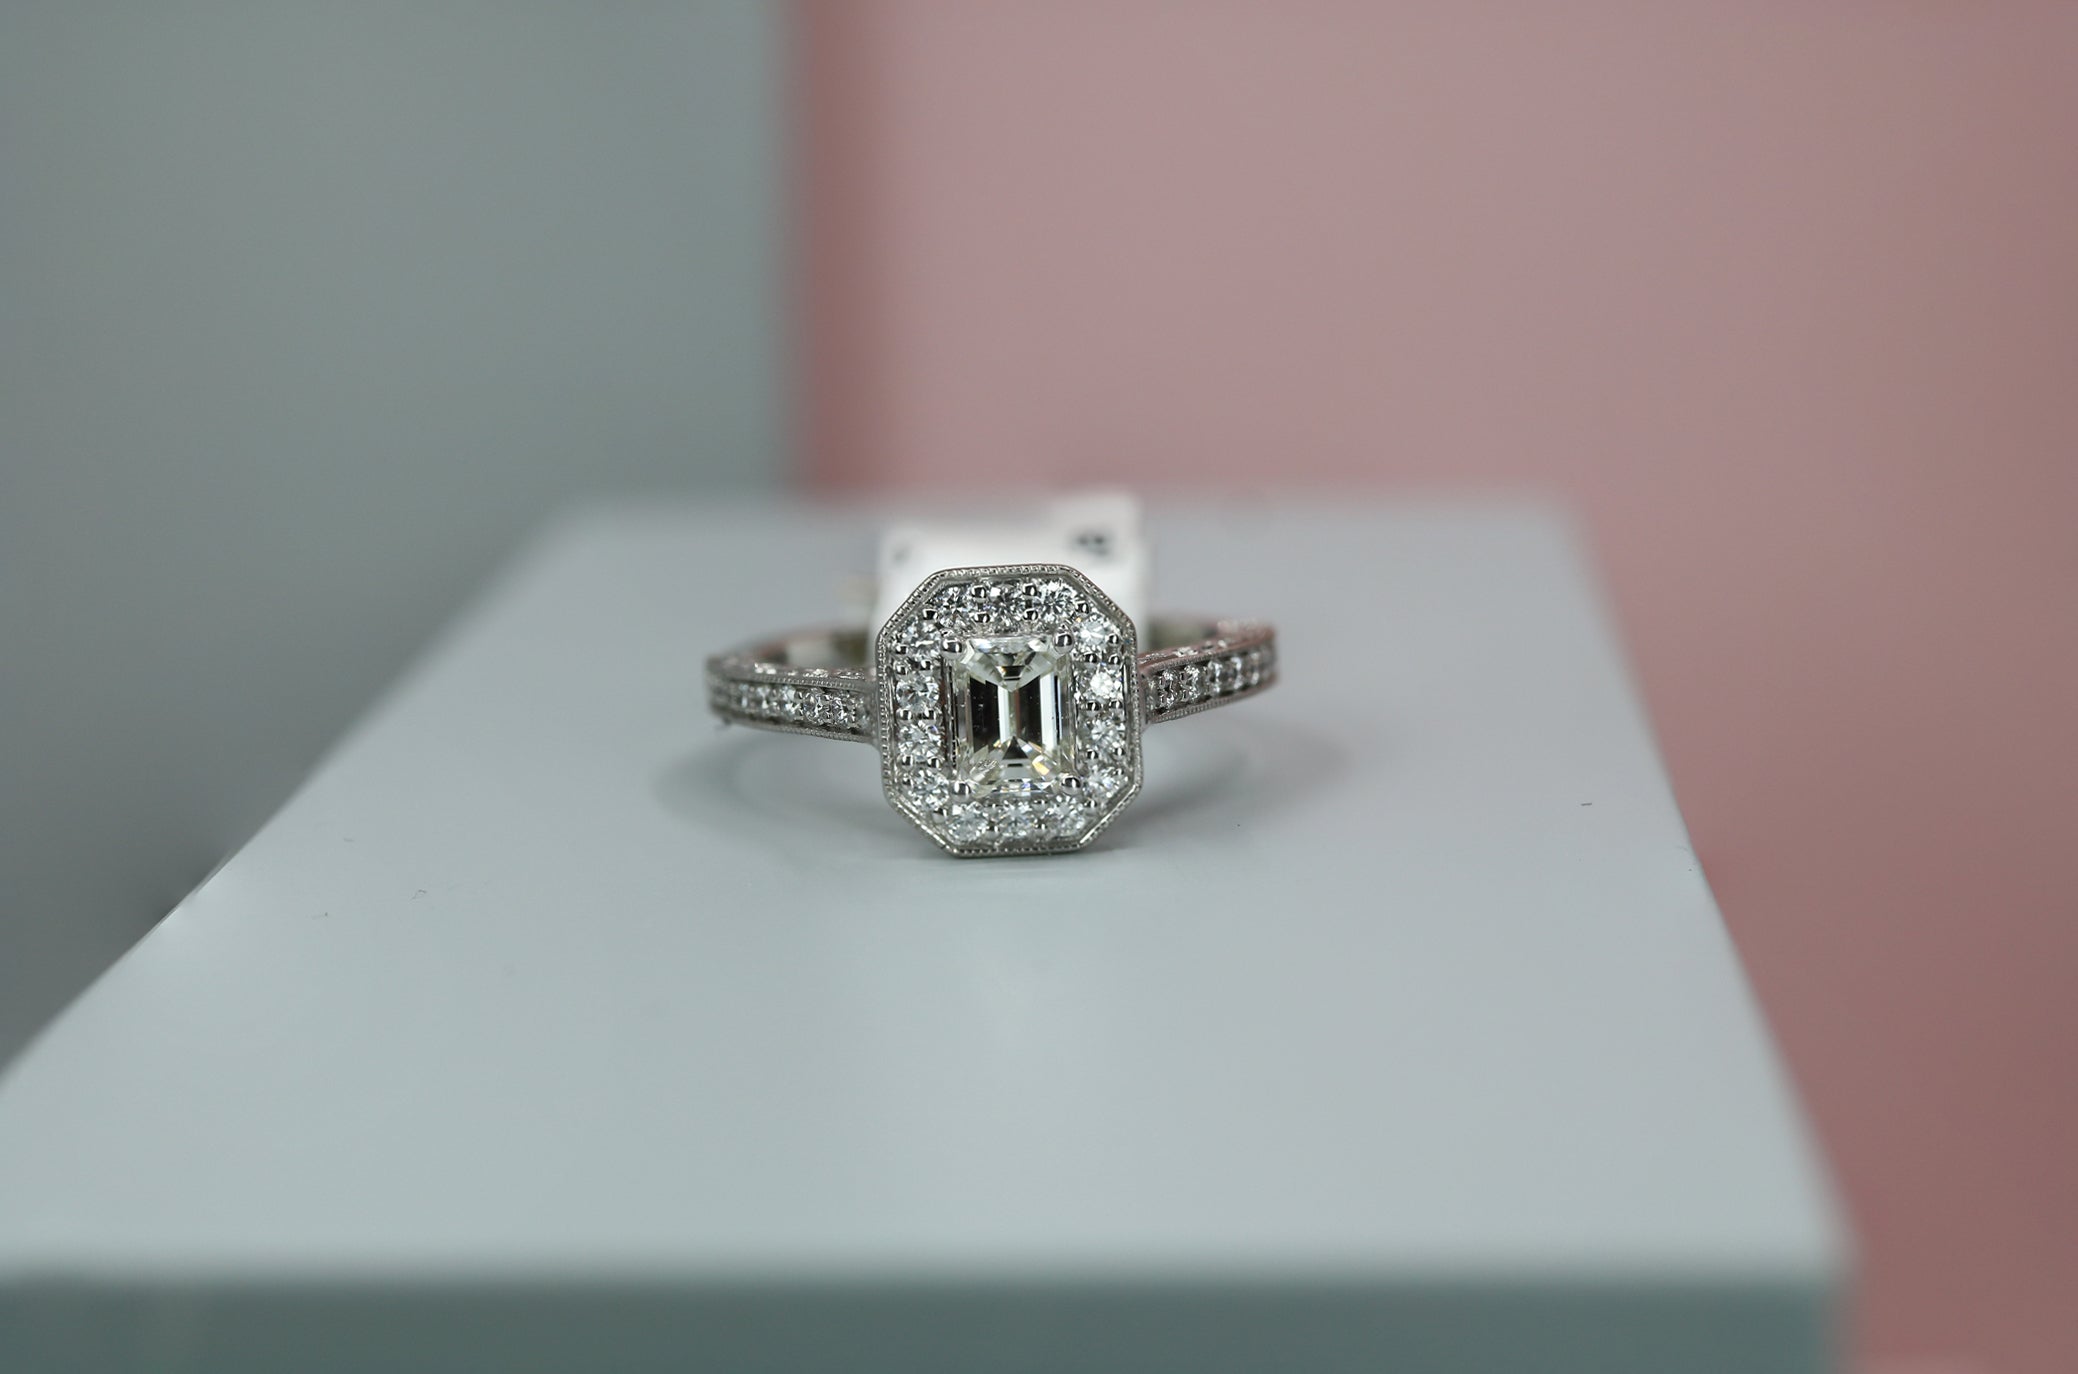 18ct White Gold Emerald Cut Diamond Ring 0.84ct - HJ2113 - Hallmark Jewellers Formby & The Jewellers Bench Widnes